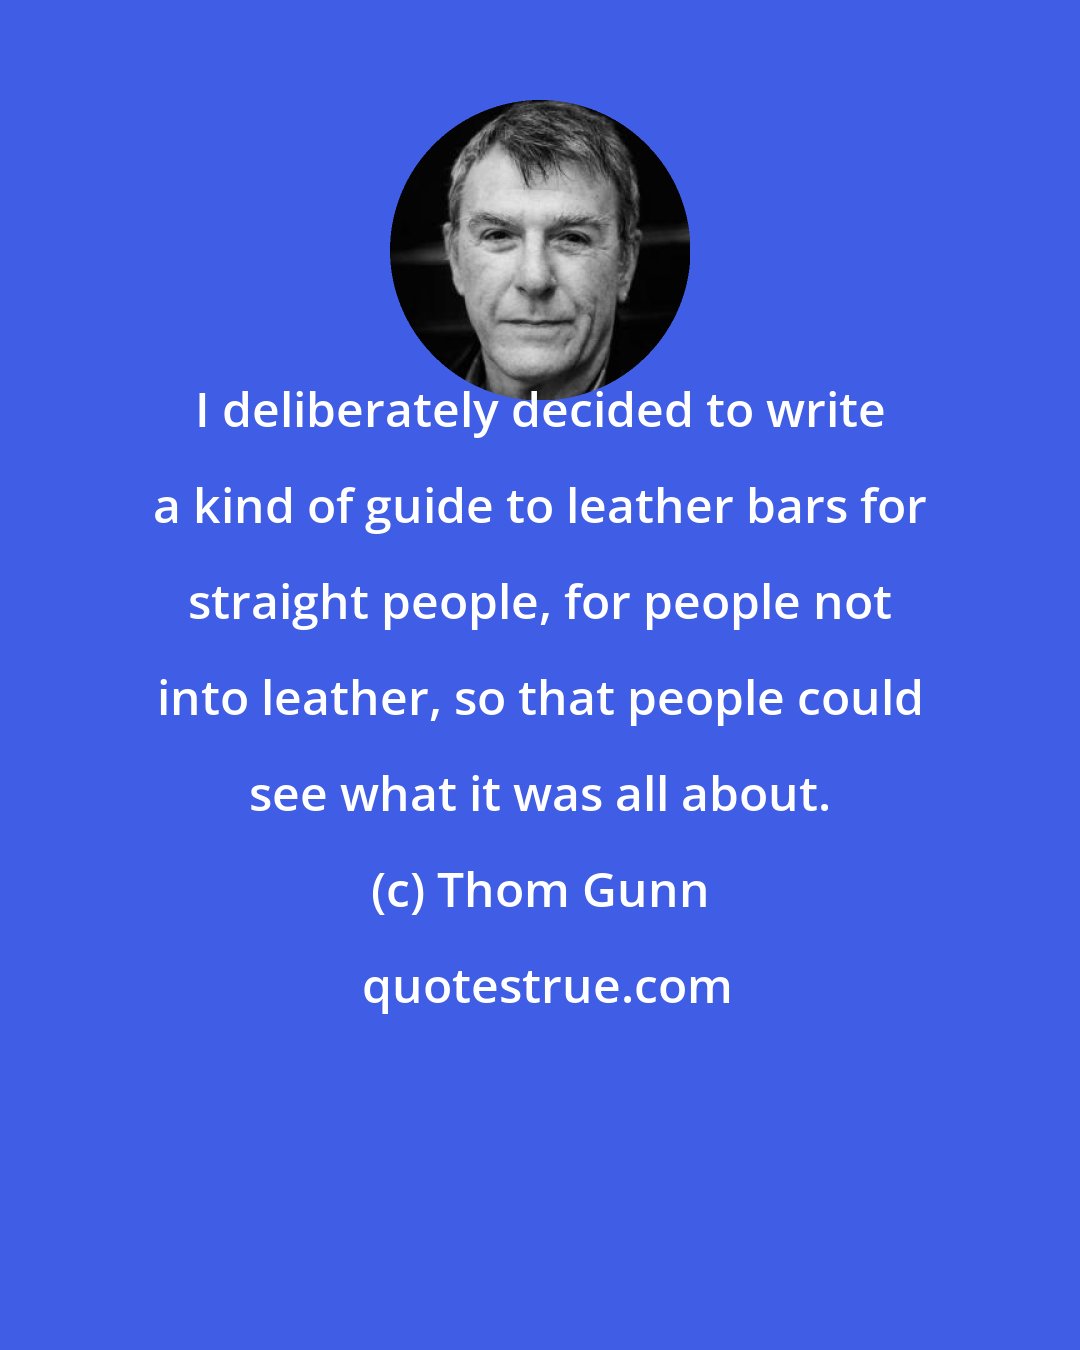 Thom Gunn: I deliberately decided to write a kind of guide to leather bars for straight people, for people not into leather, so that people could see what it was all about.